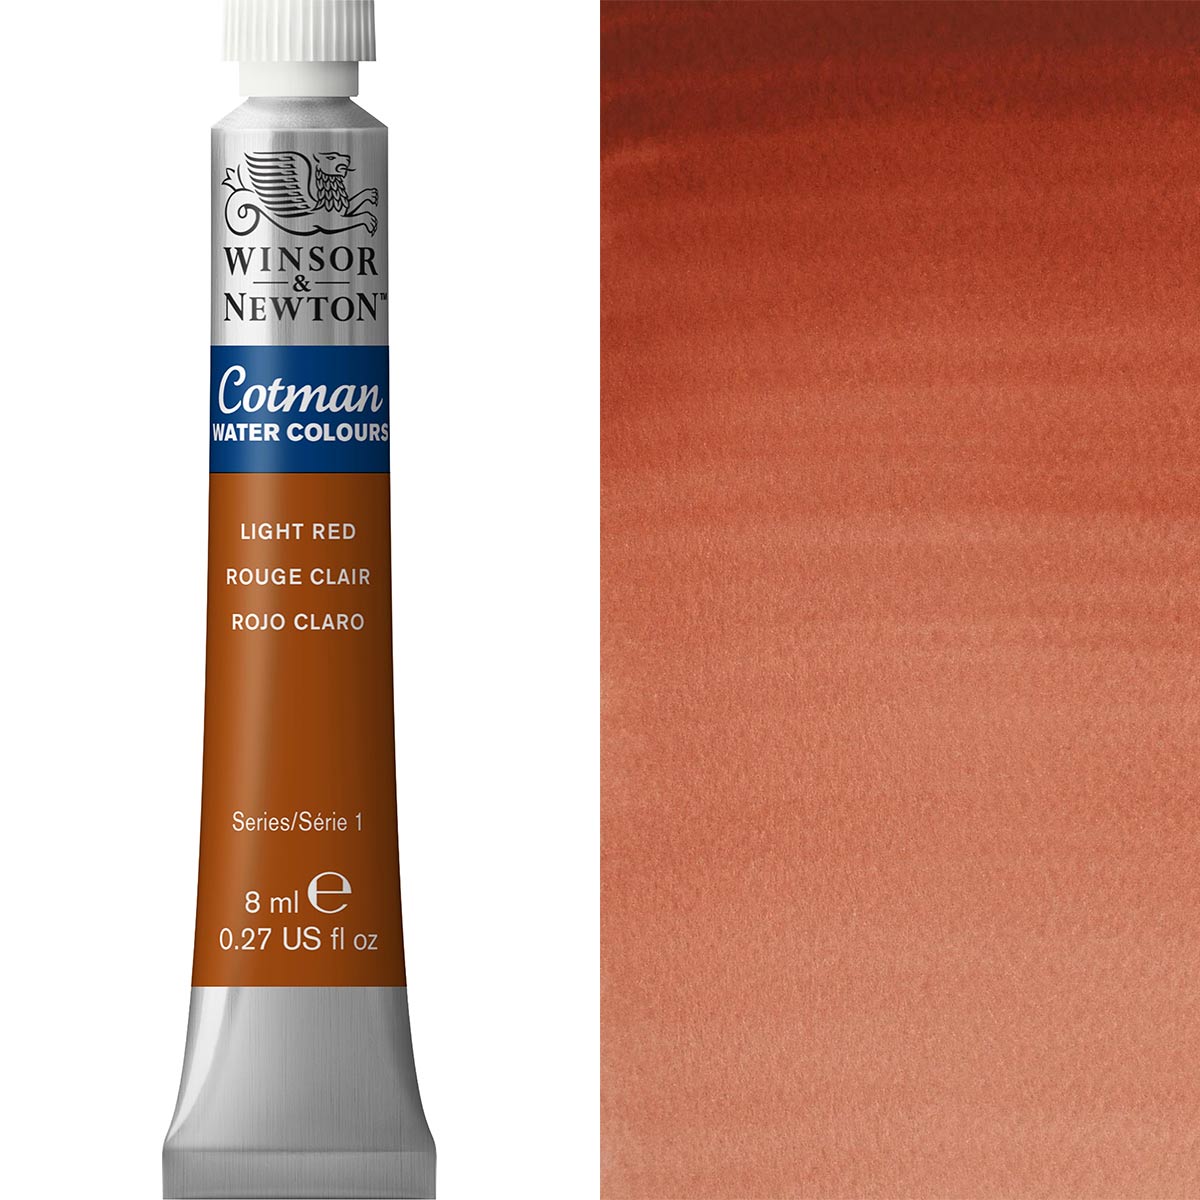 Winsor and Newton - Cotman Watercolour - 8ml - Light Red